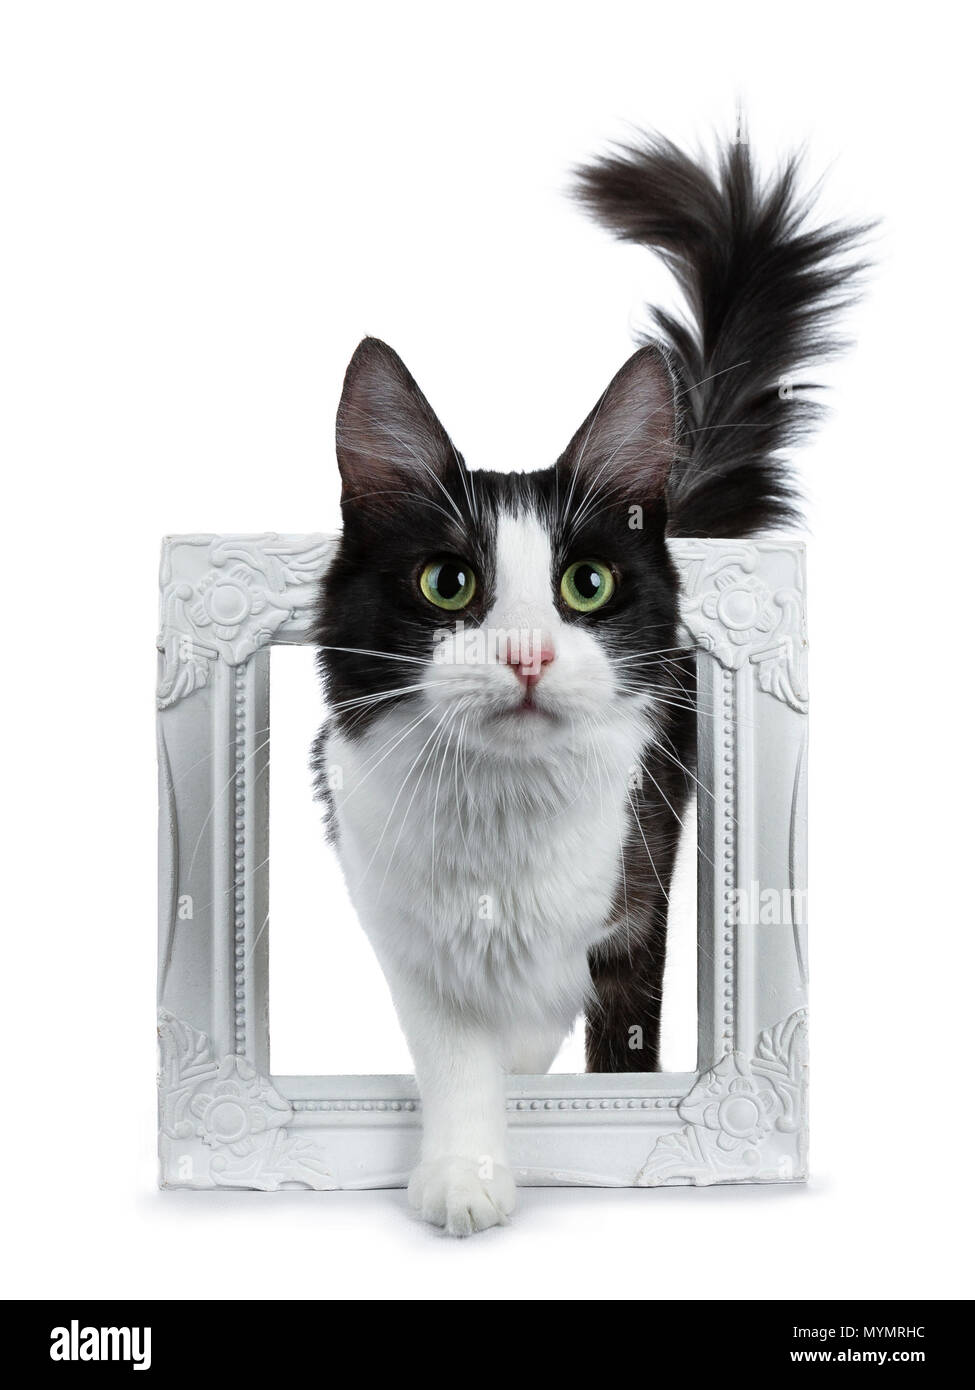 Cute black smoke with white Turkish Angora cat standing in white photo  frame on white background with tail in the air Stock Photo - Alamy